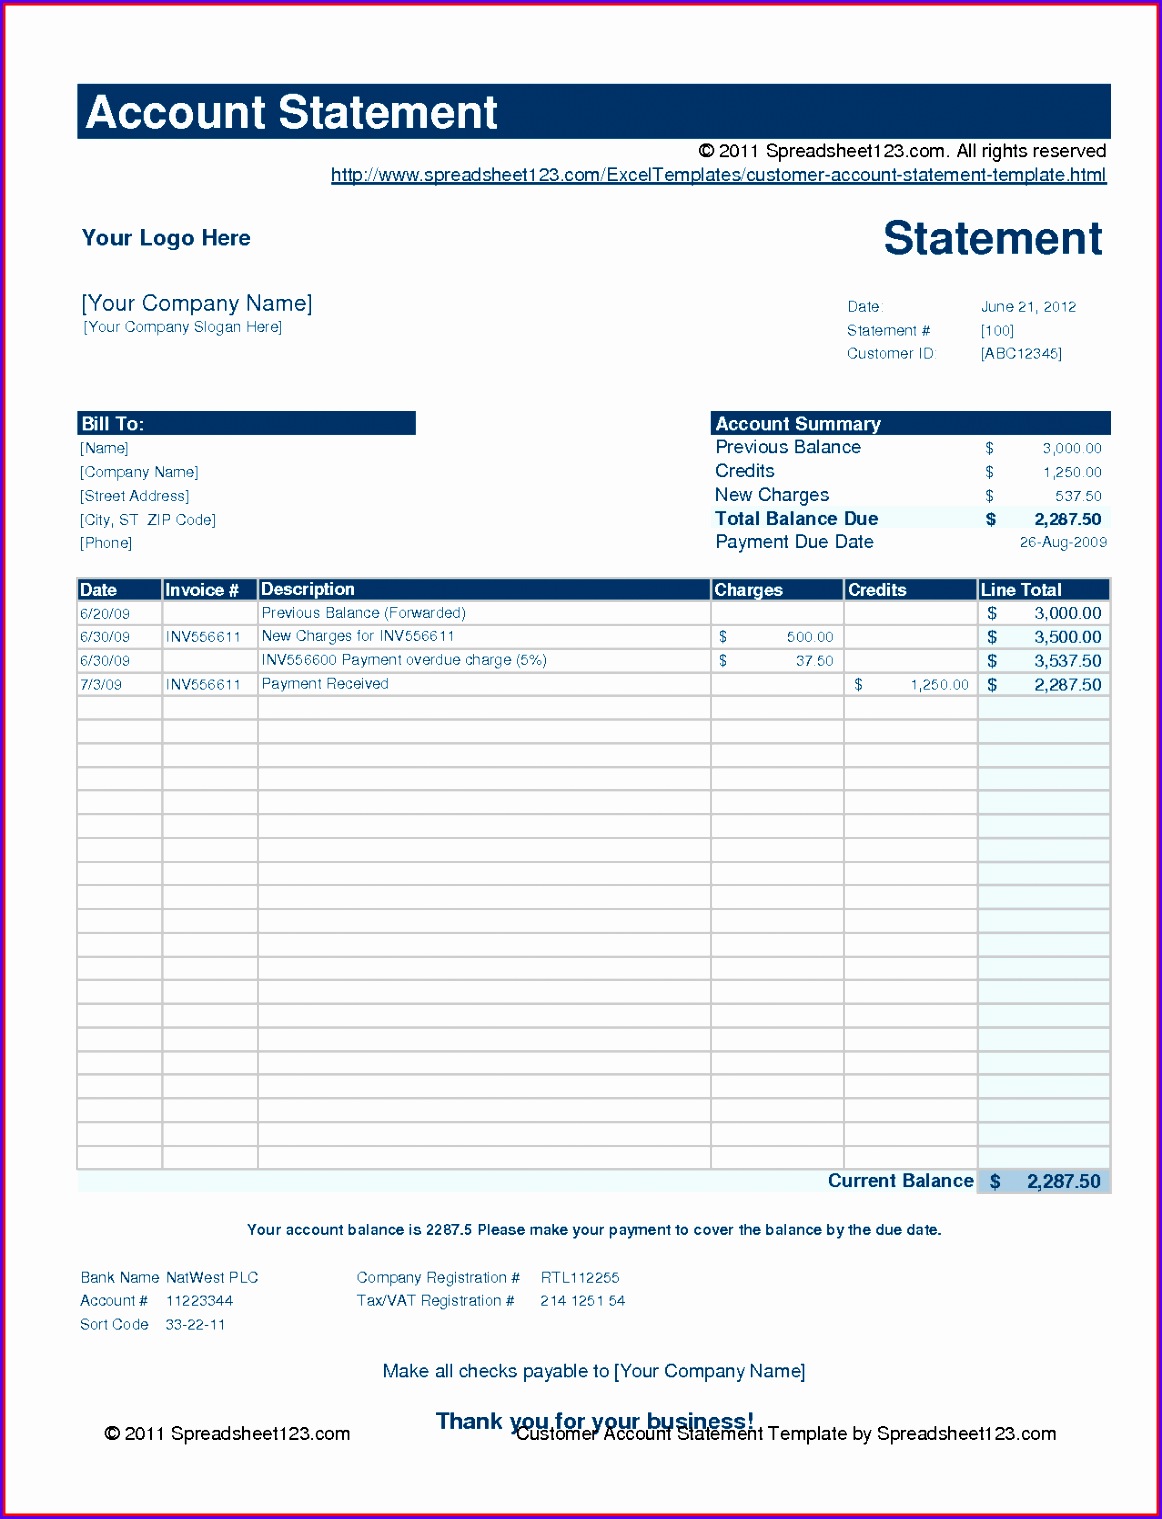 customer account statement template free and party pictures 11621519